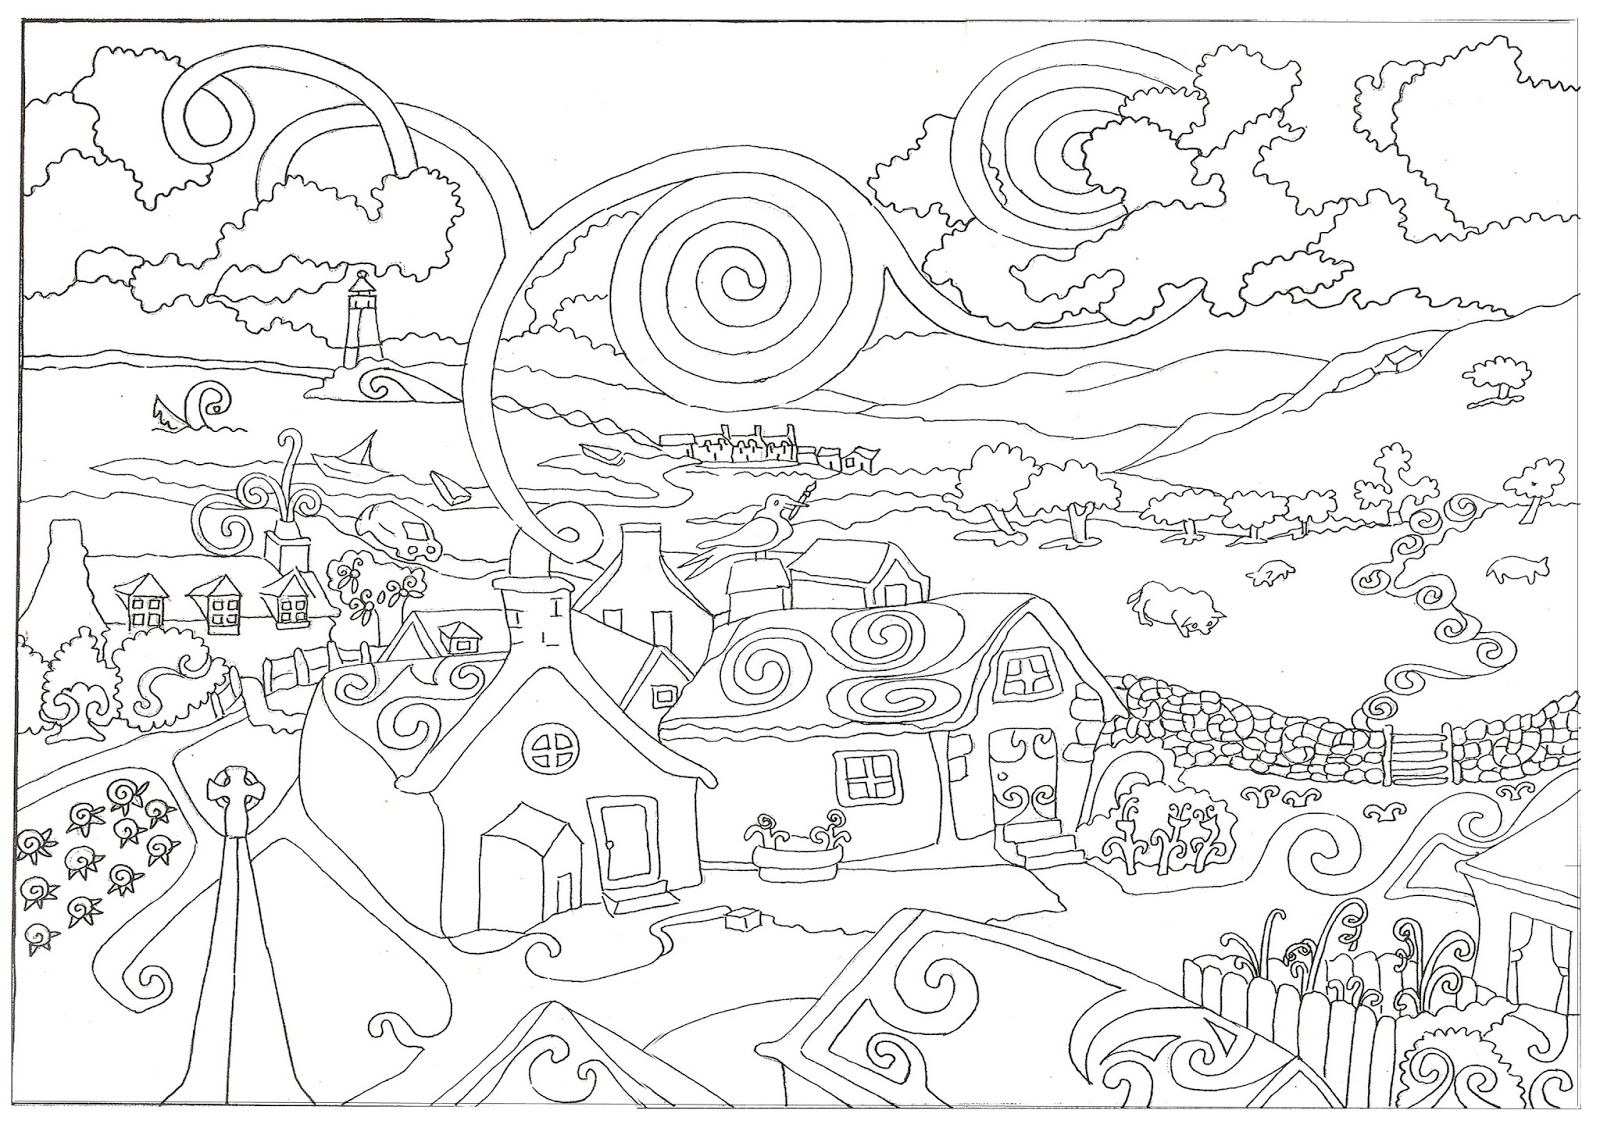 Download Coloring Page World: In the Country